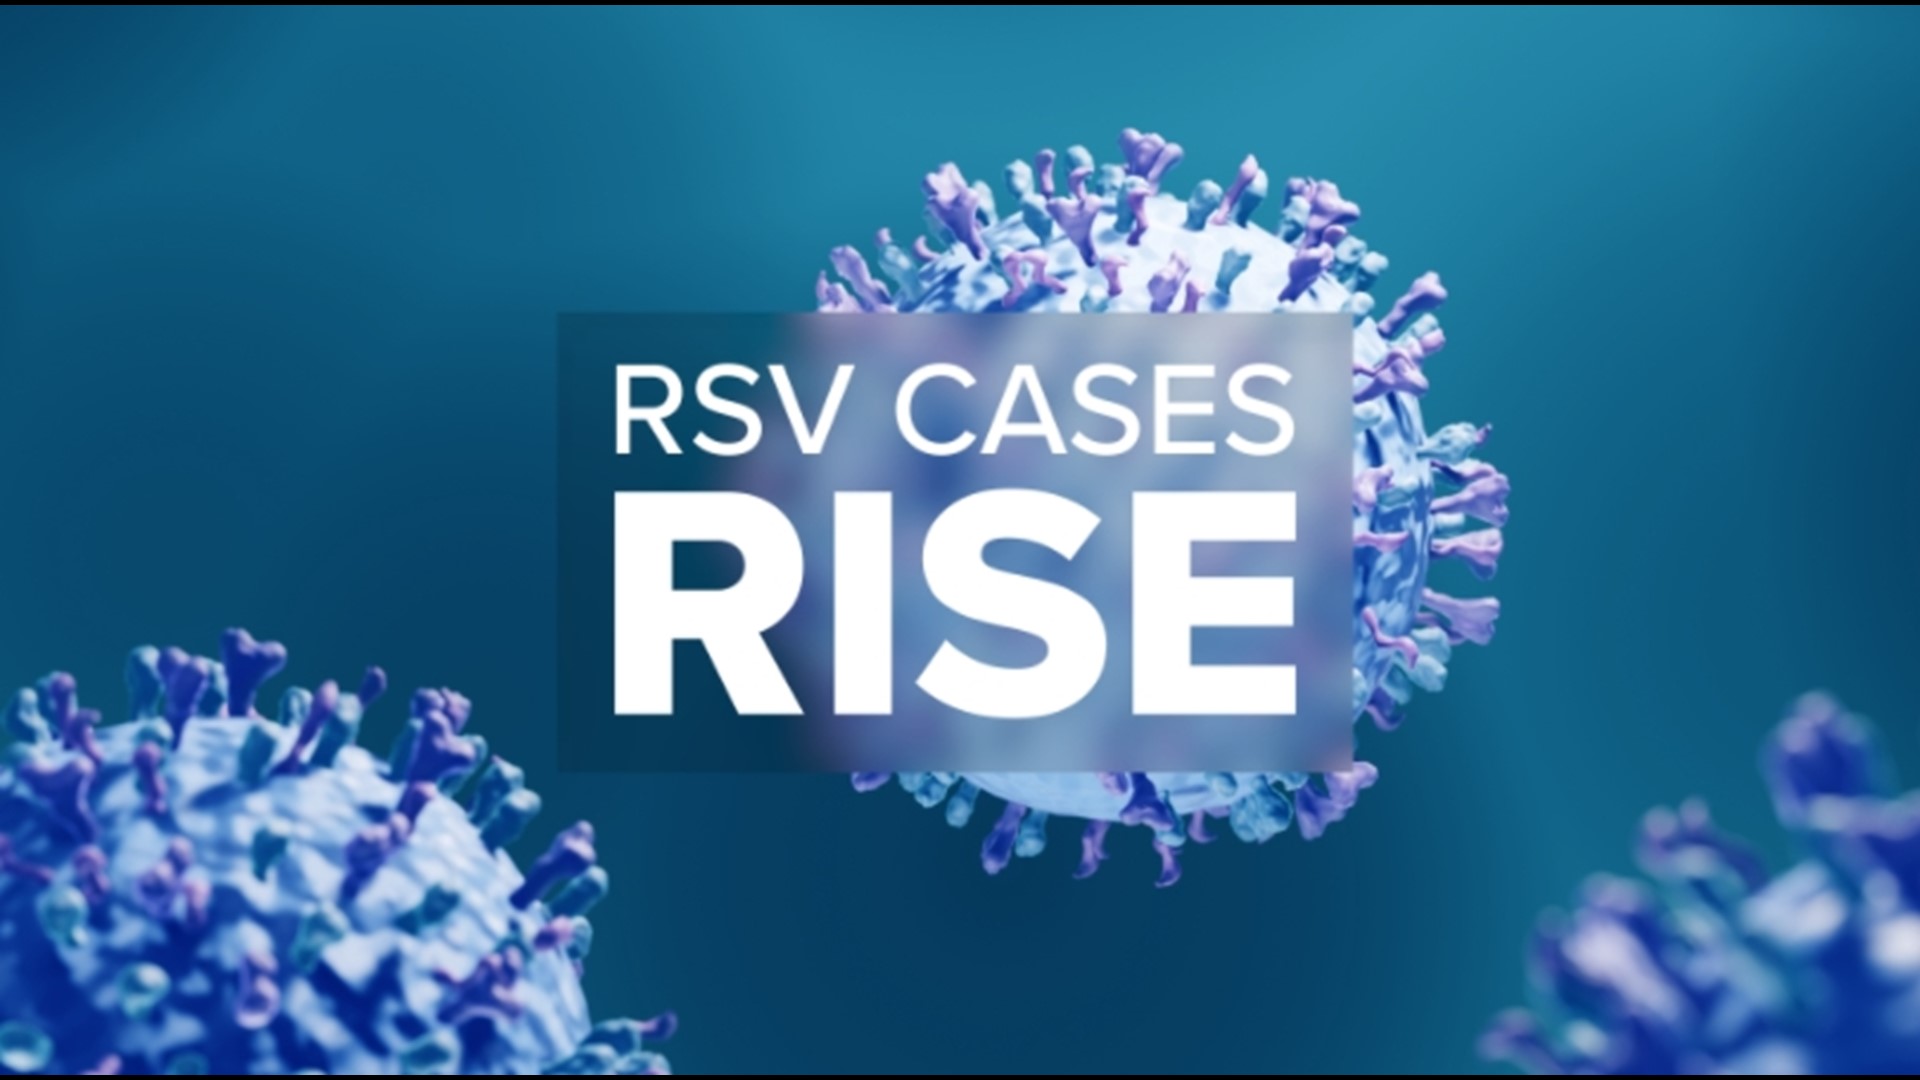 Currently about a third of patients admitted to the Children's Hospital have RSV.